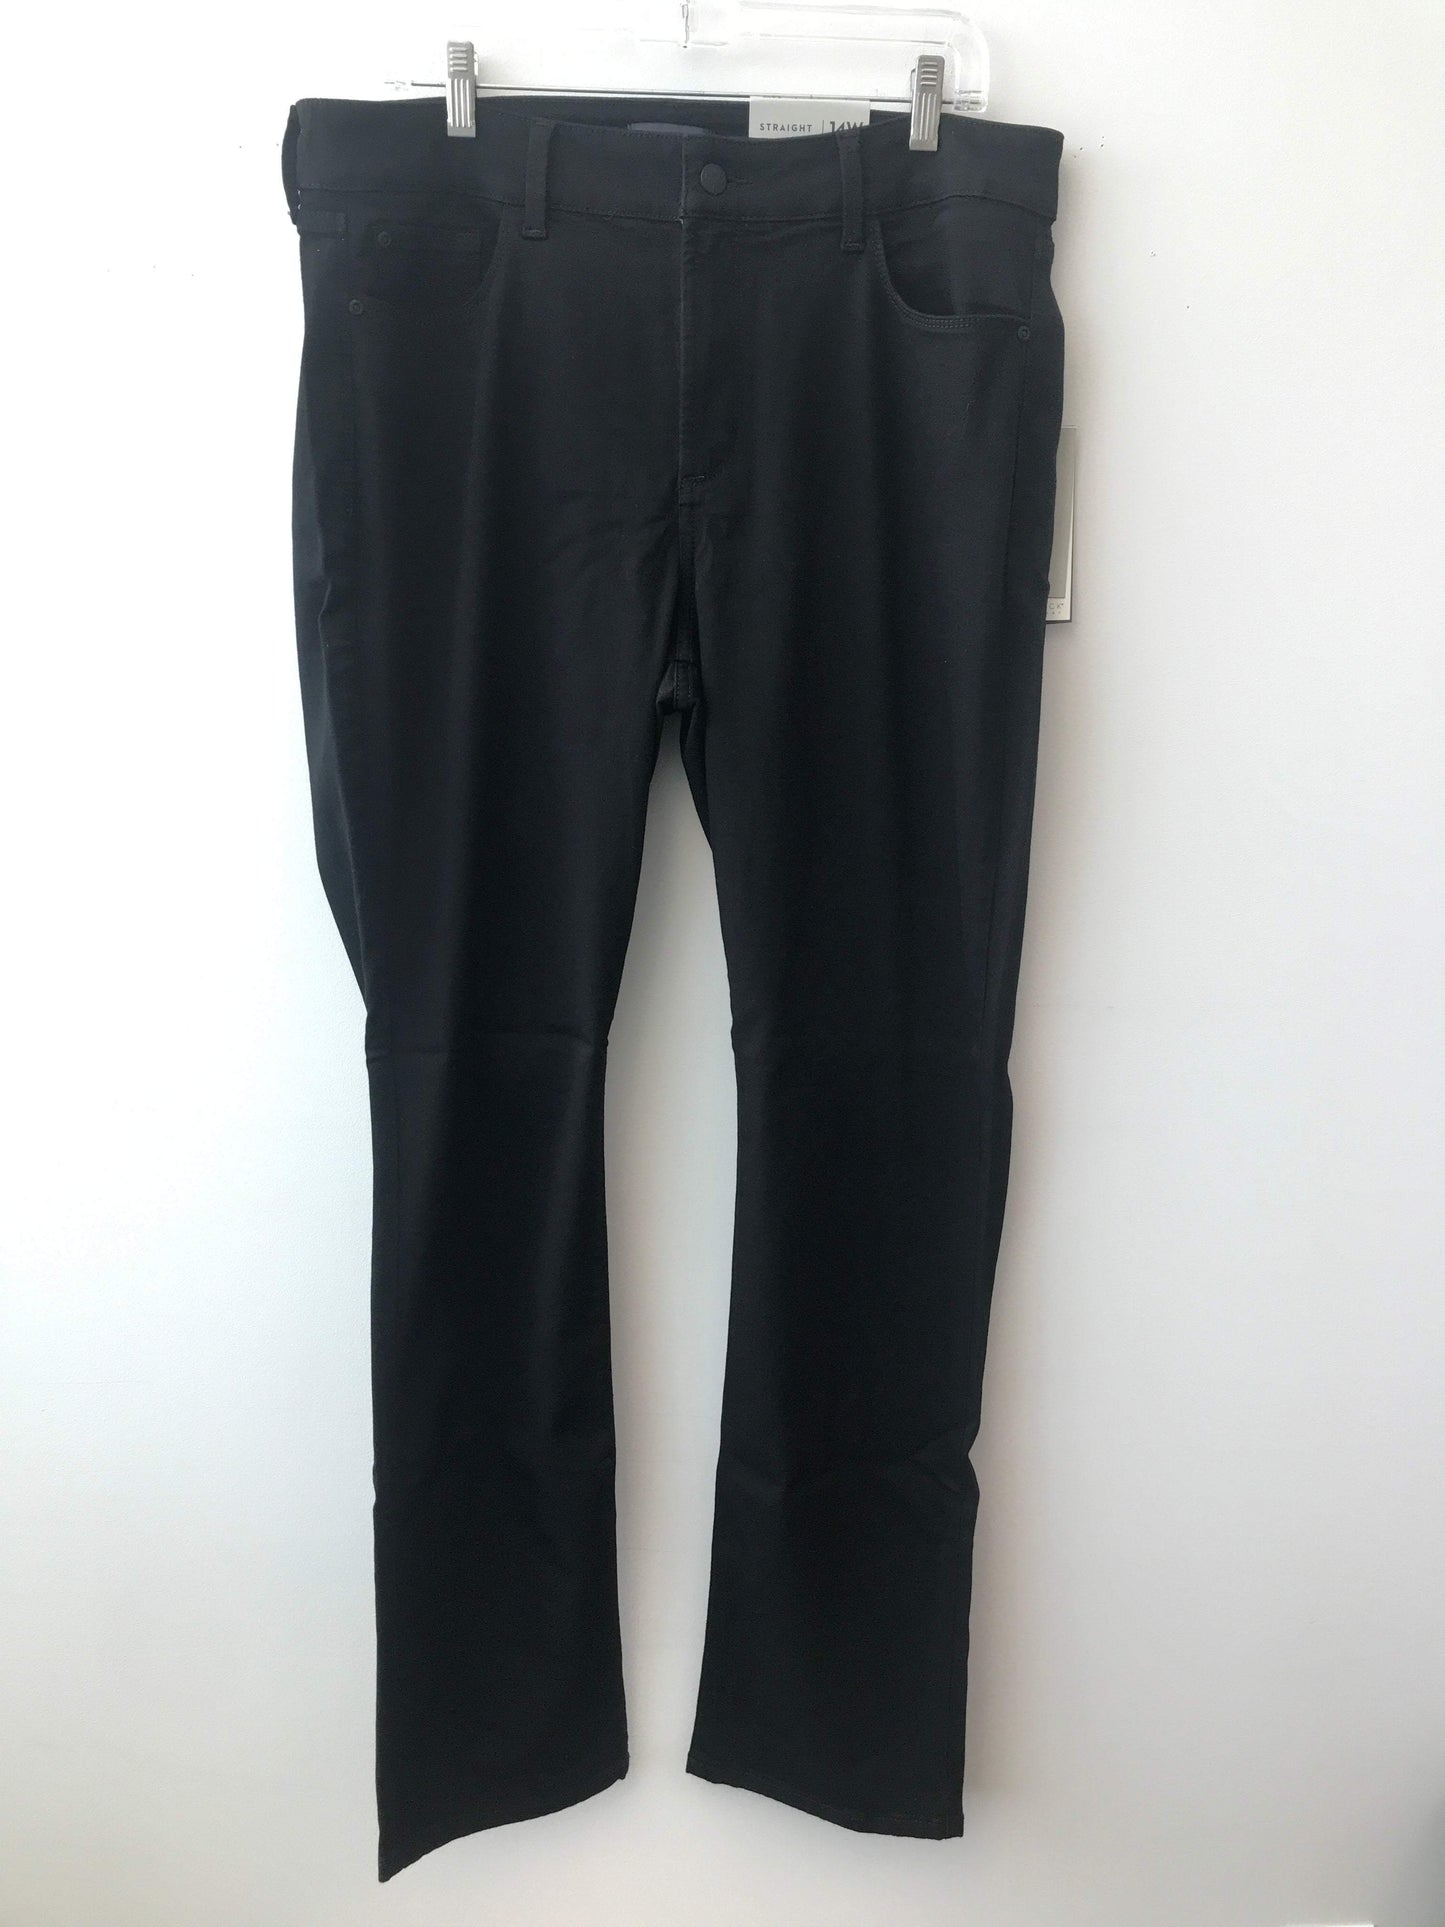 Not Your Daughter's Jeans Size 14W Viscose/Cotton Blend Black Jeans NWT